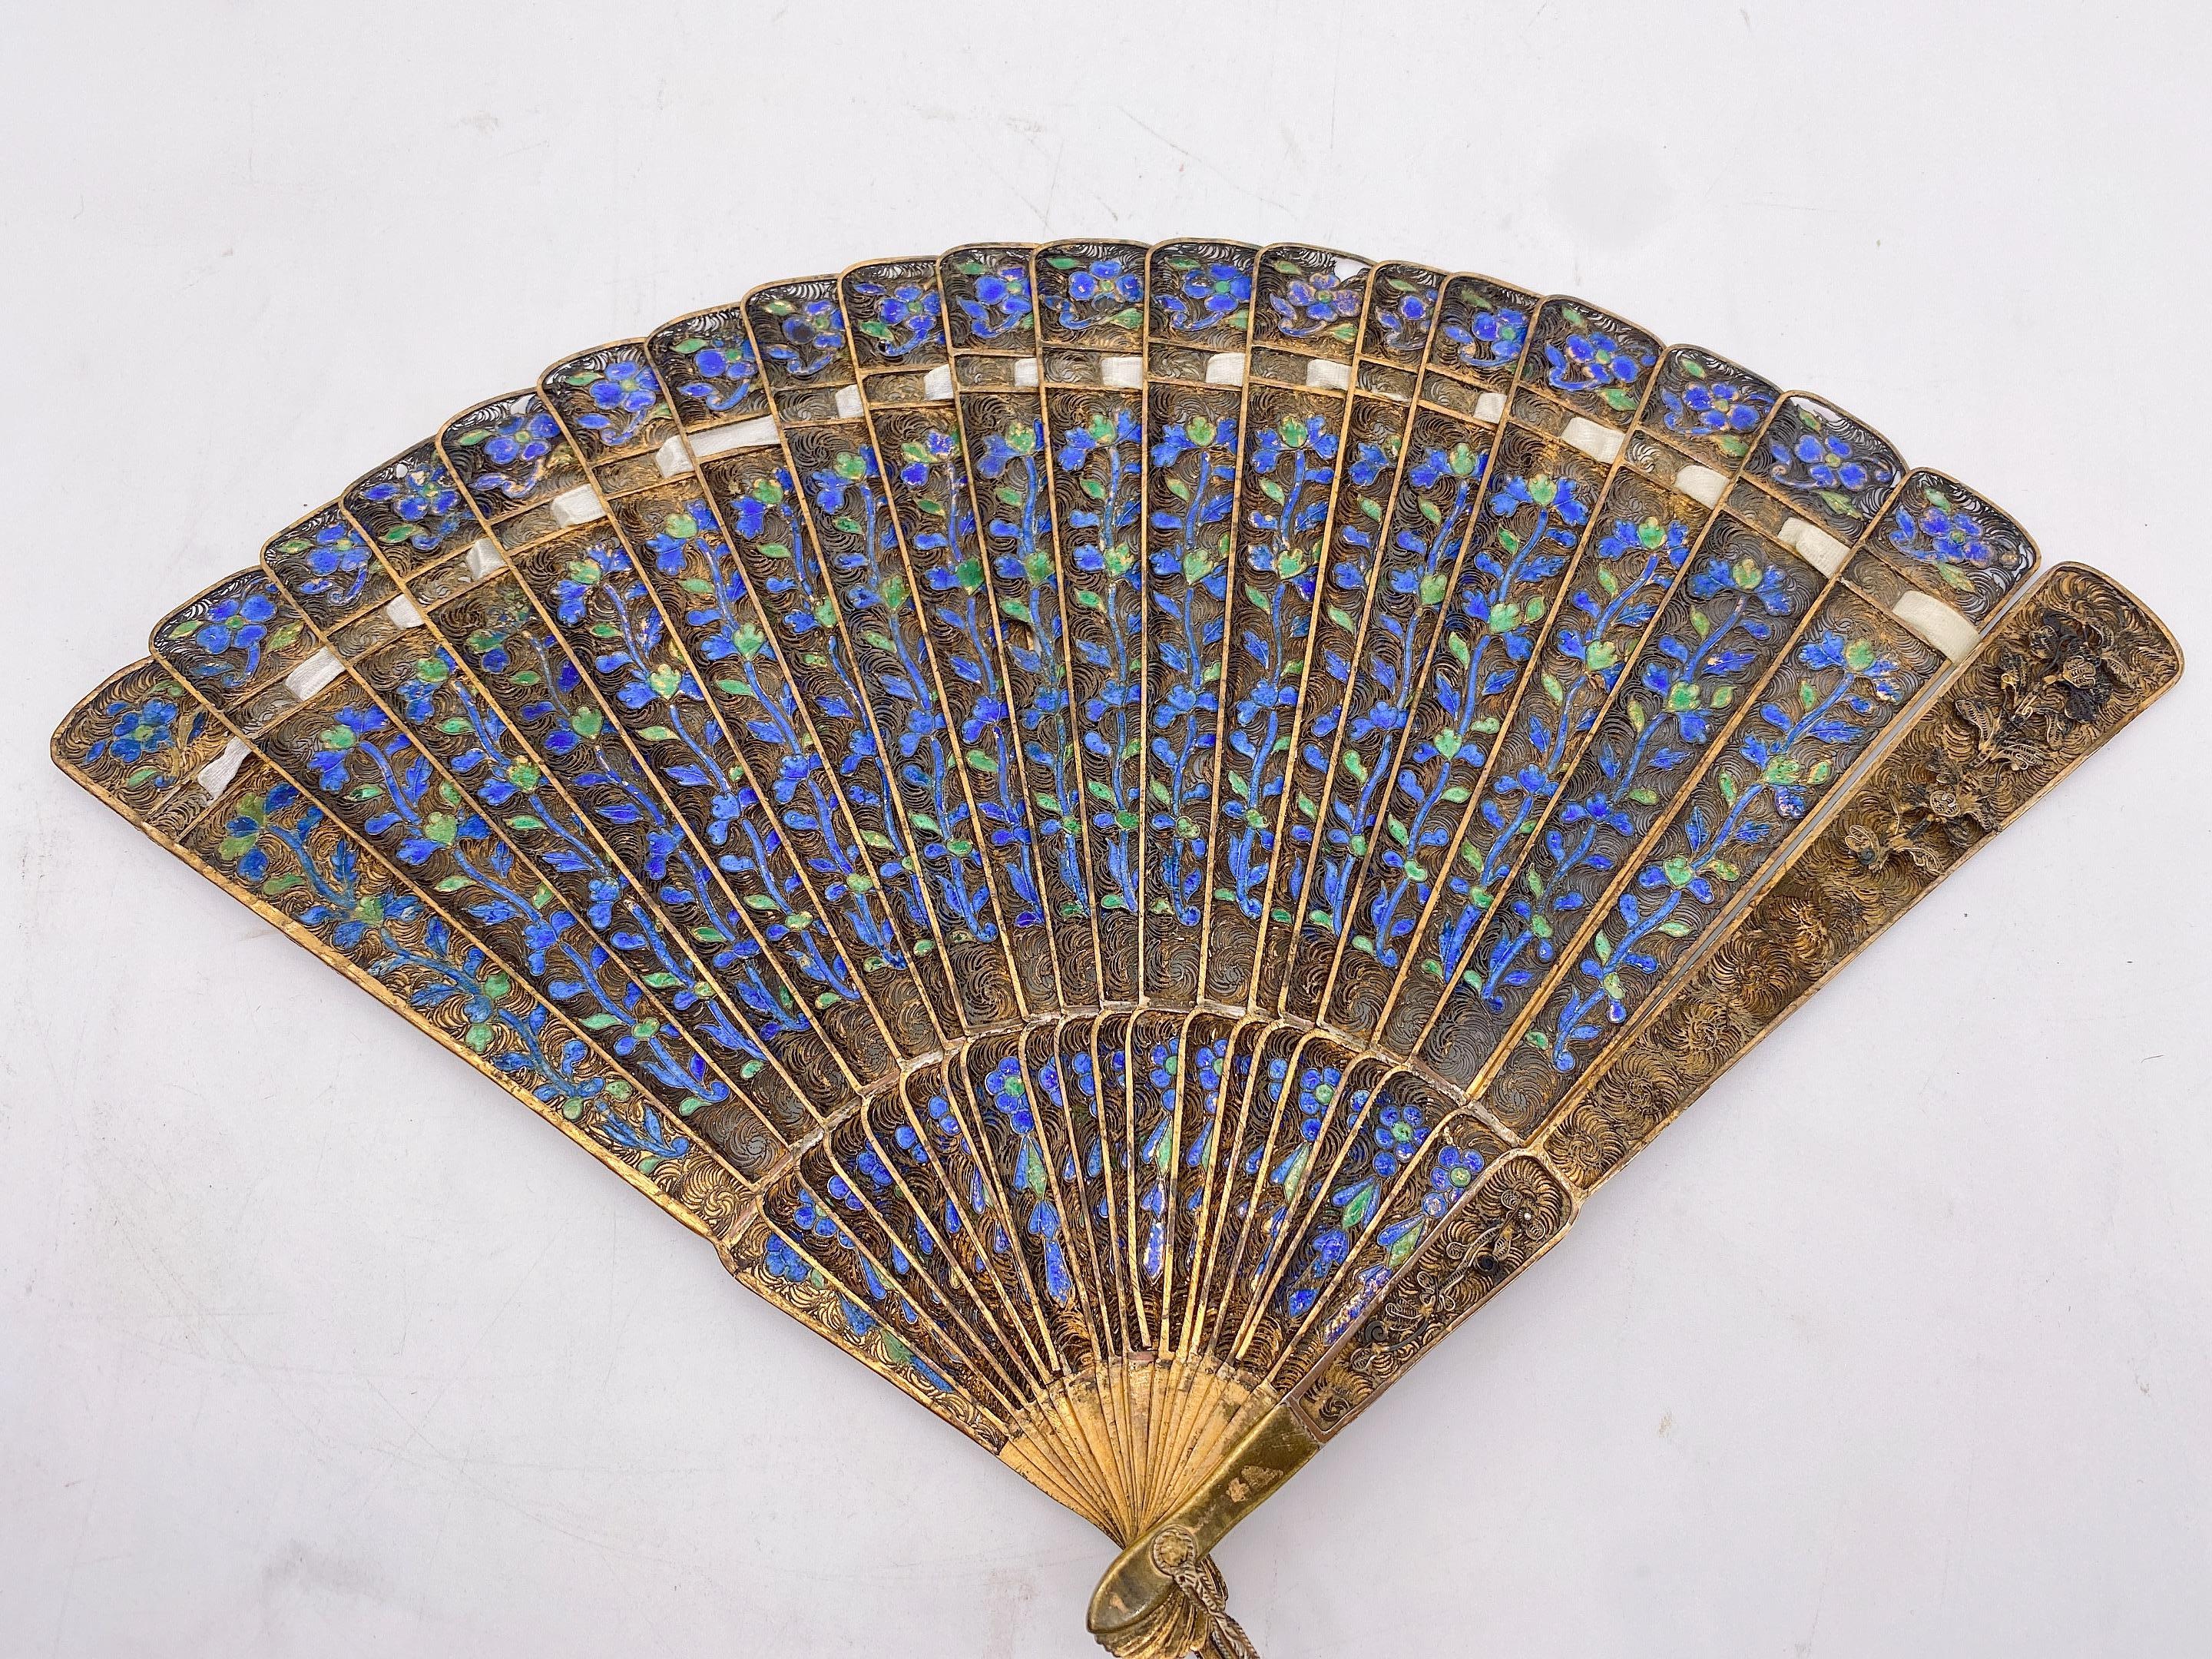 Hand-Carved Rare Unique 17th Century Chinese Gilt Silver Filigree and Enamel Brise Fan For Sale